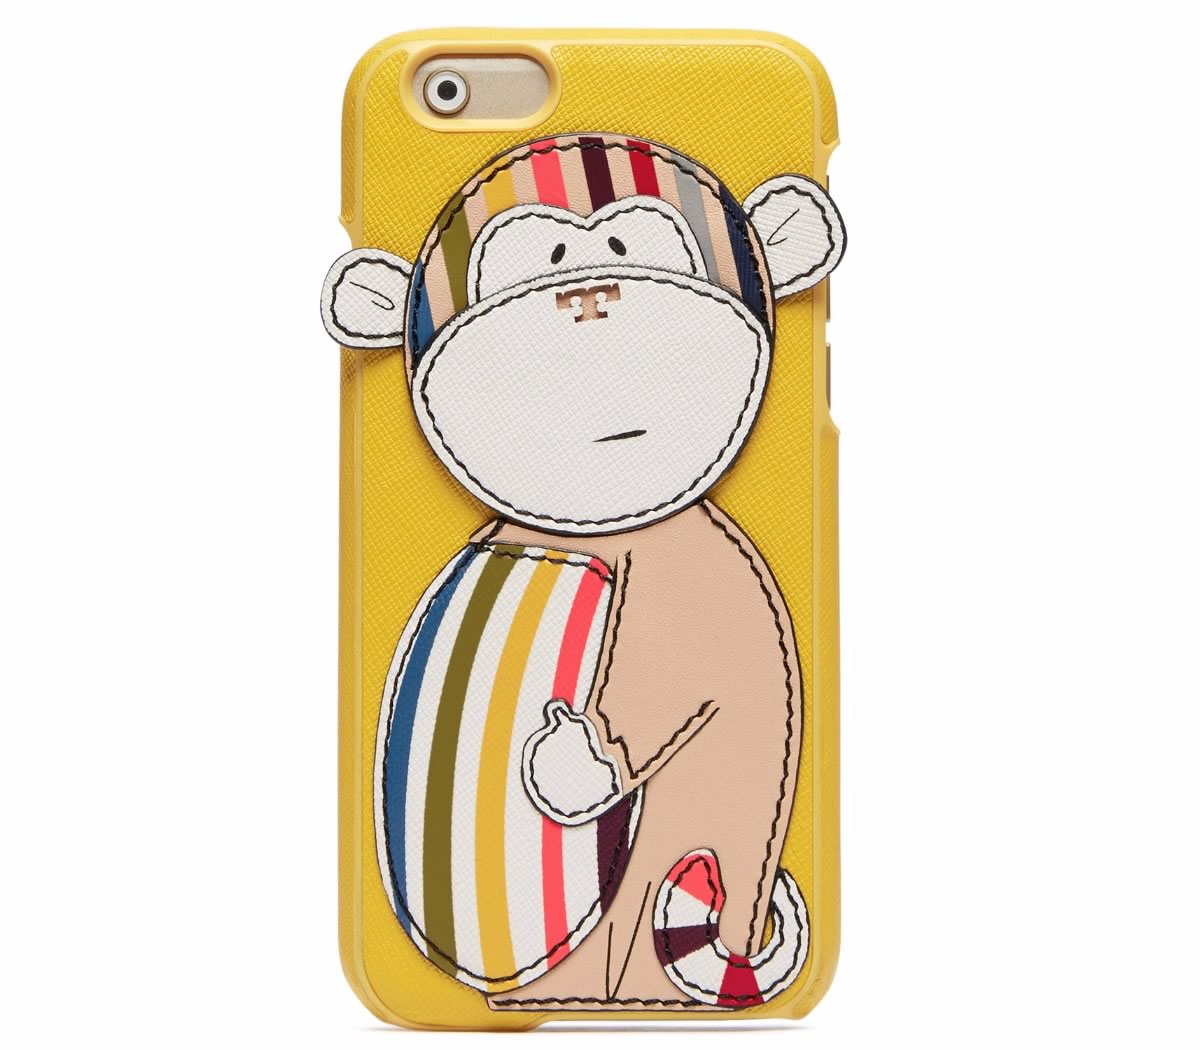 Tory Burch Monkey Applique Case for iPhone 6